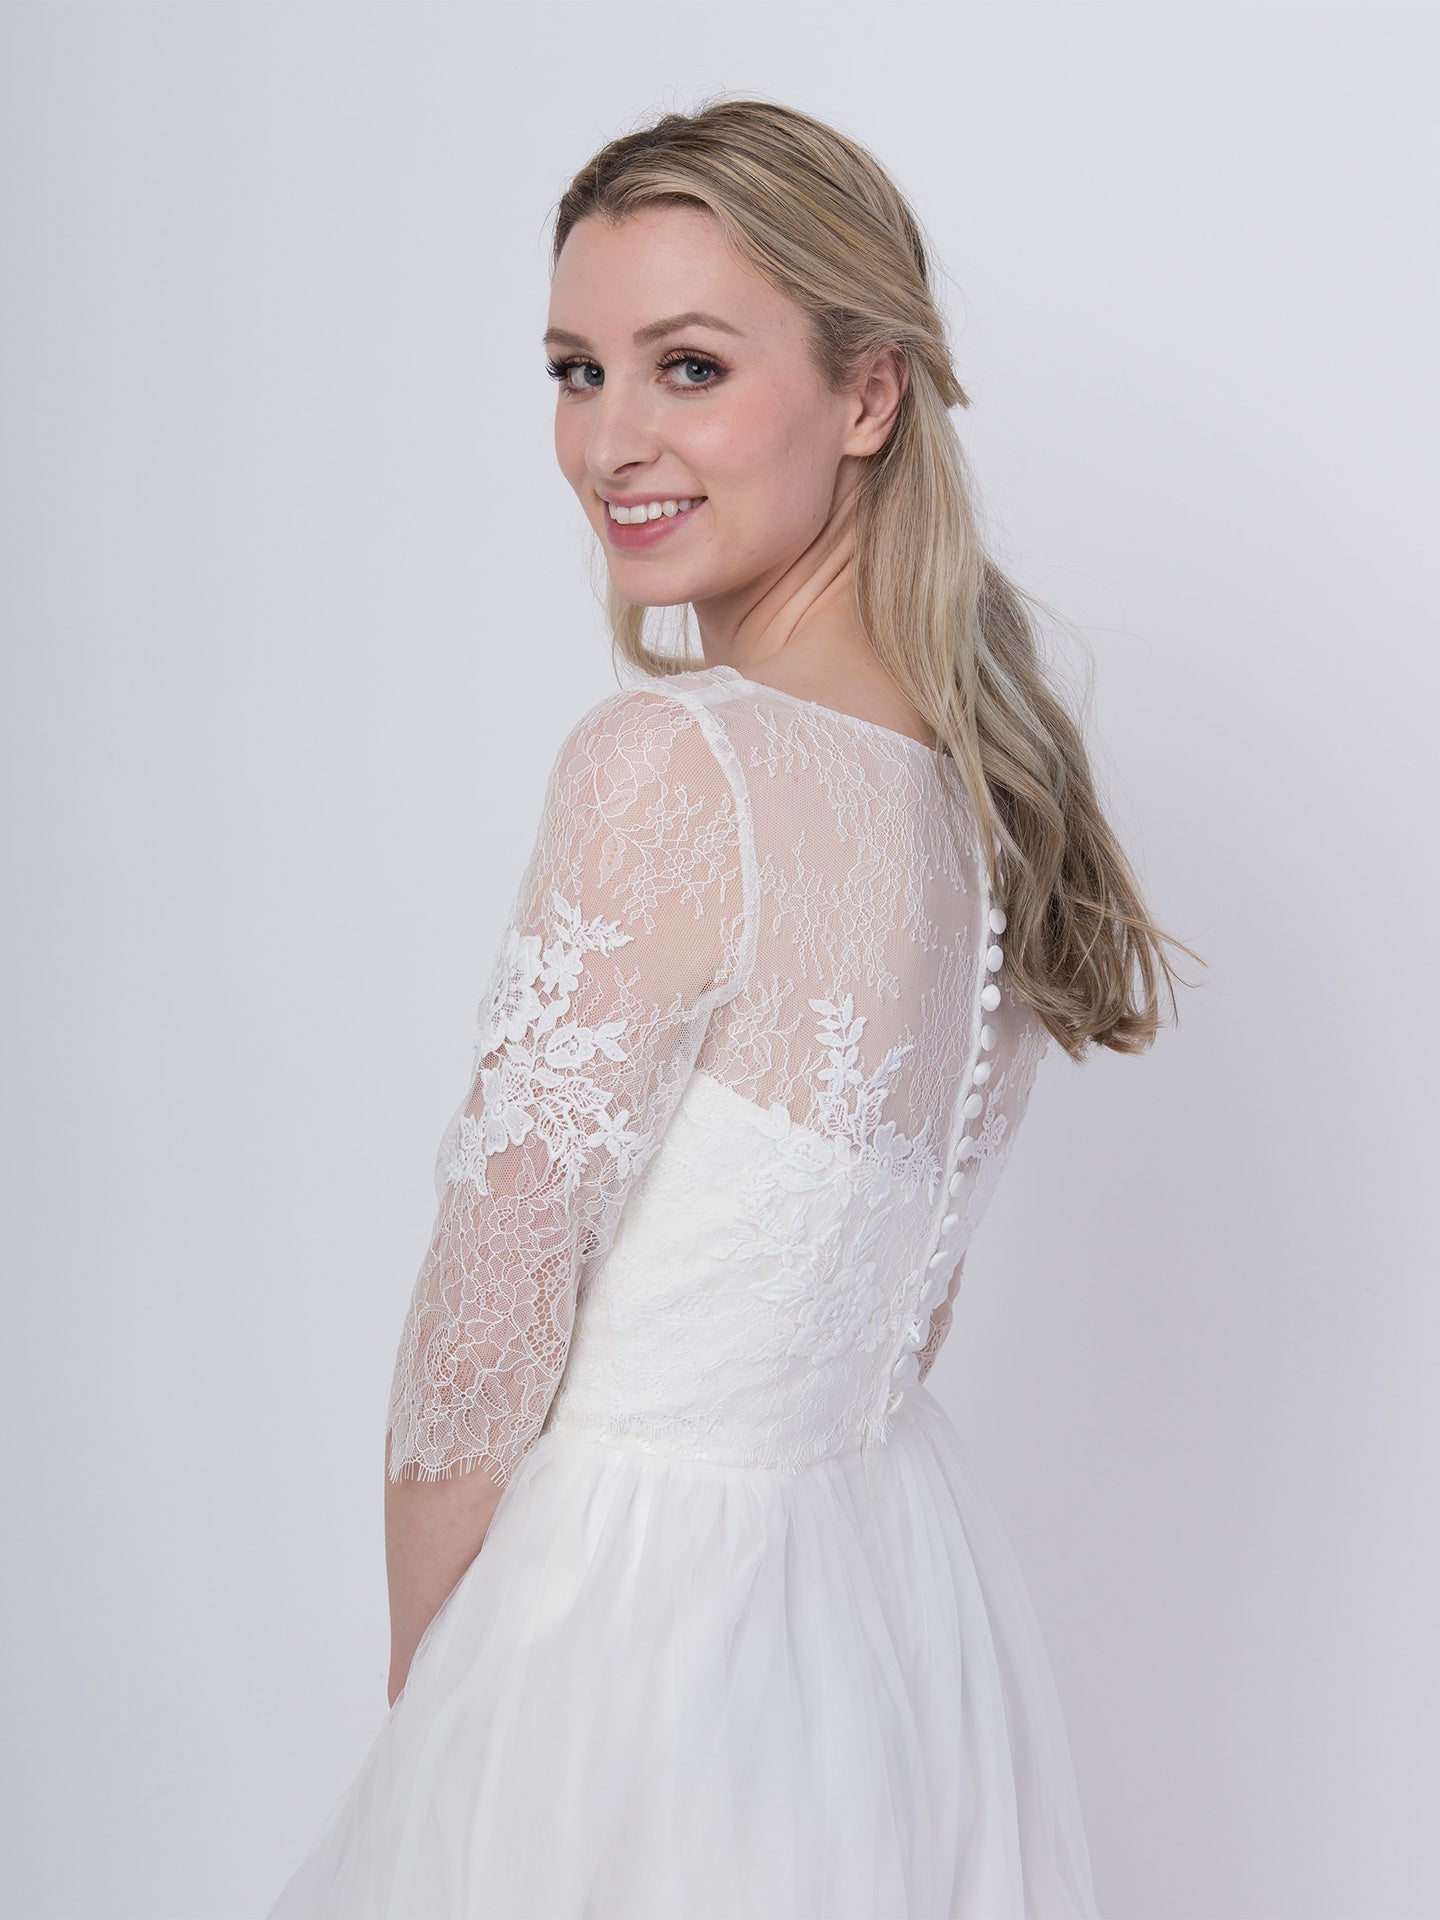 Lace wedding dress topper elbow length sleeve